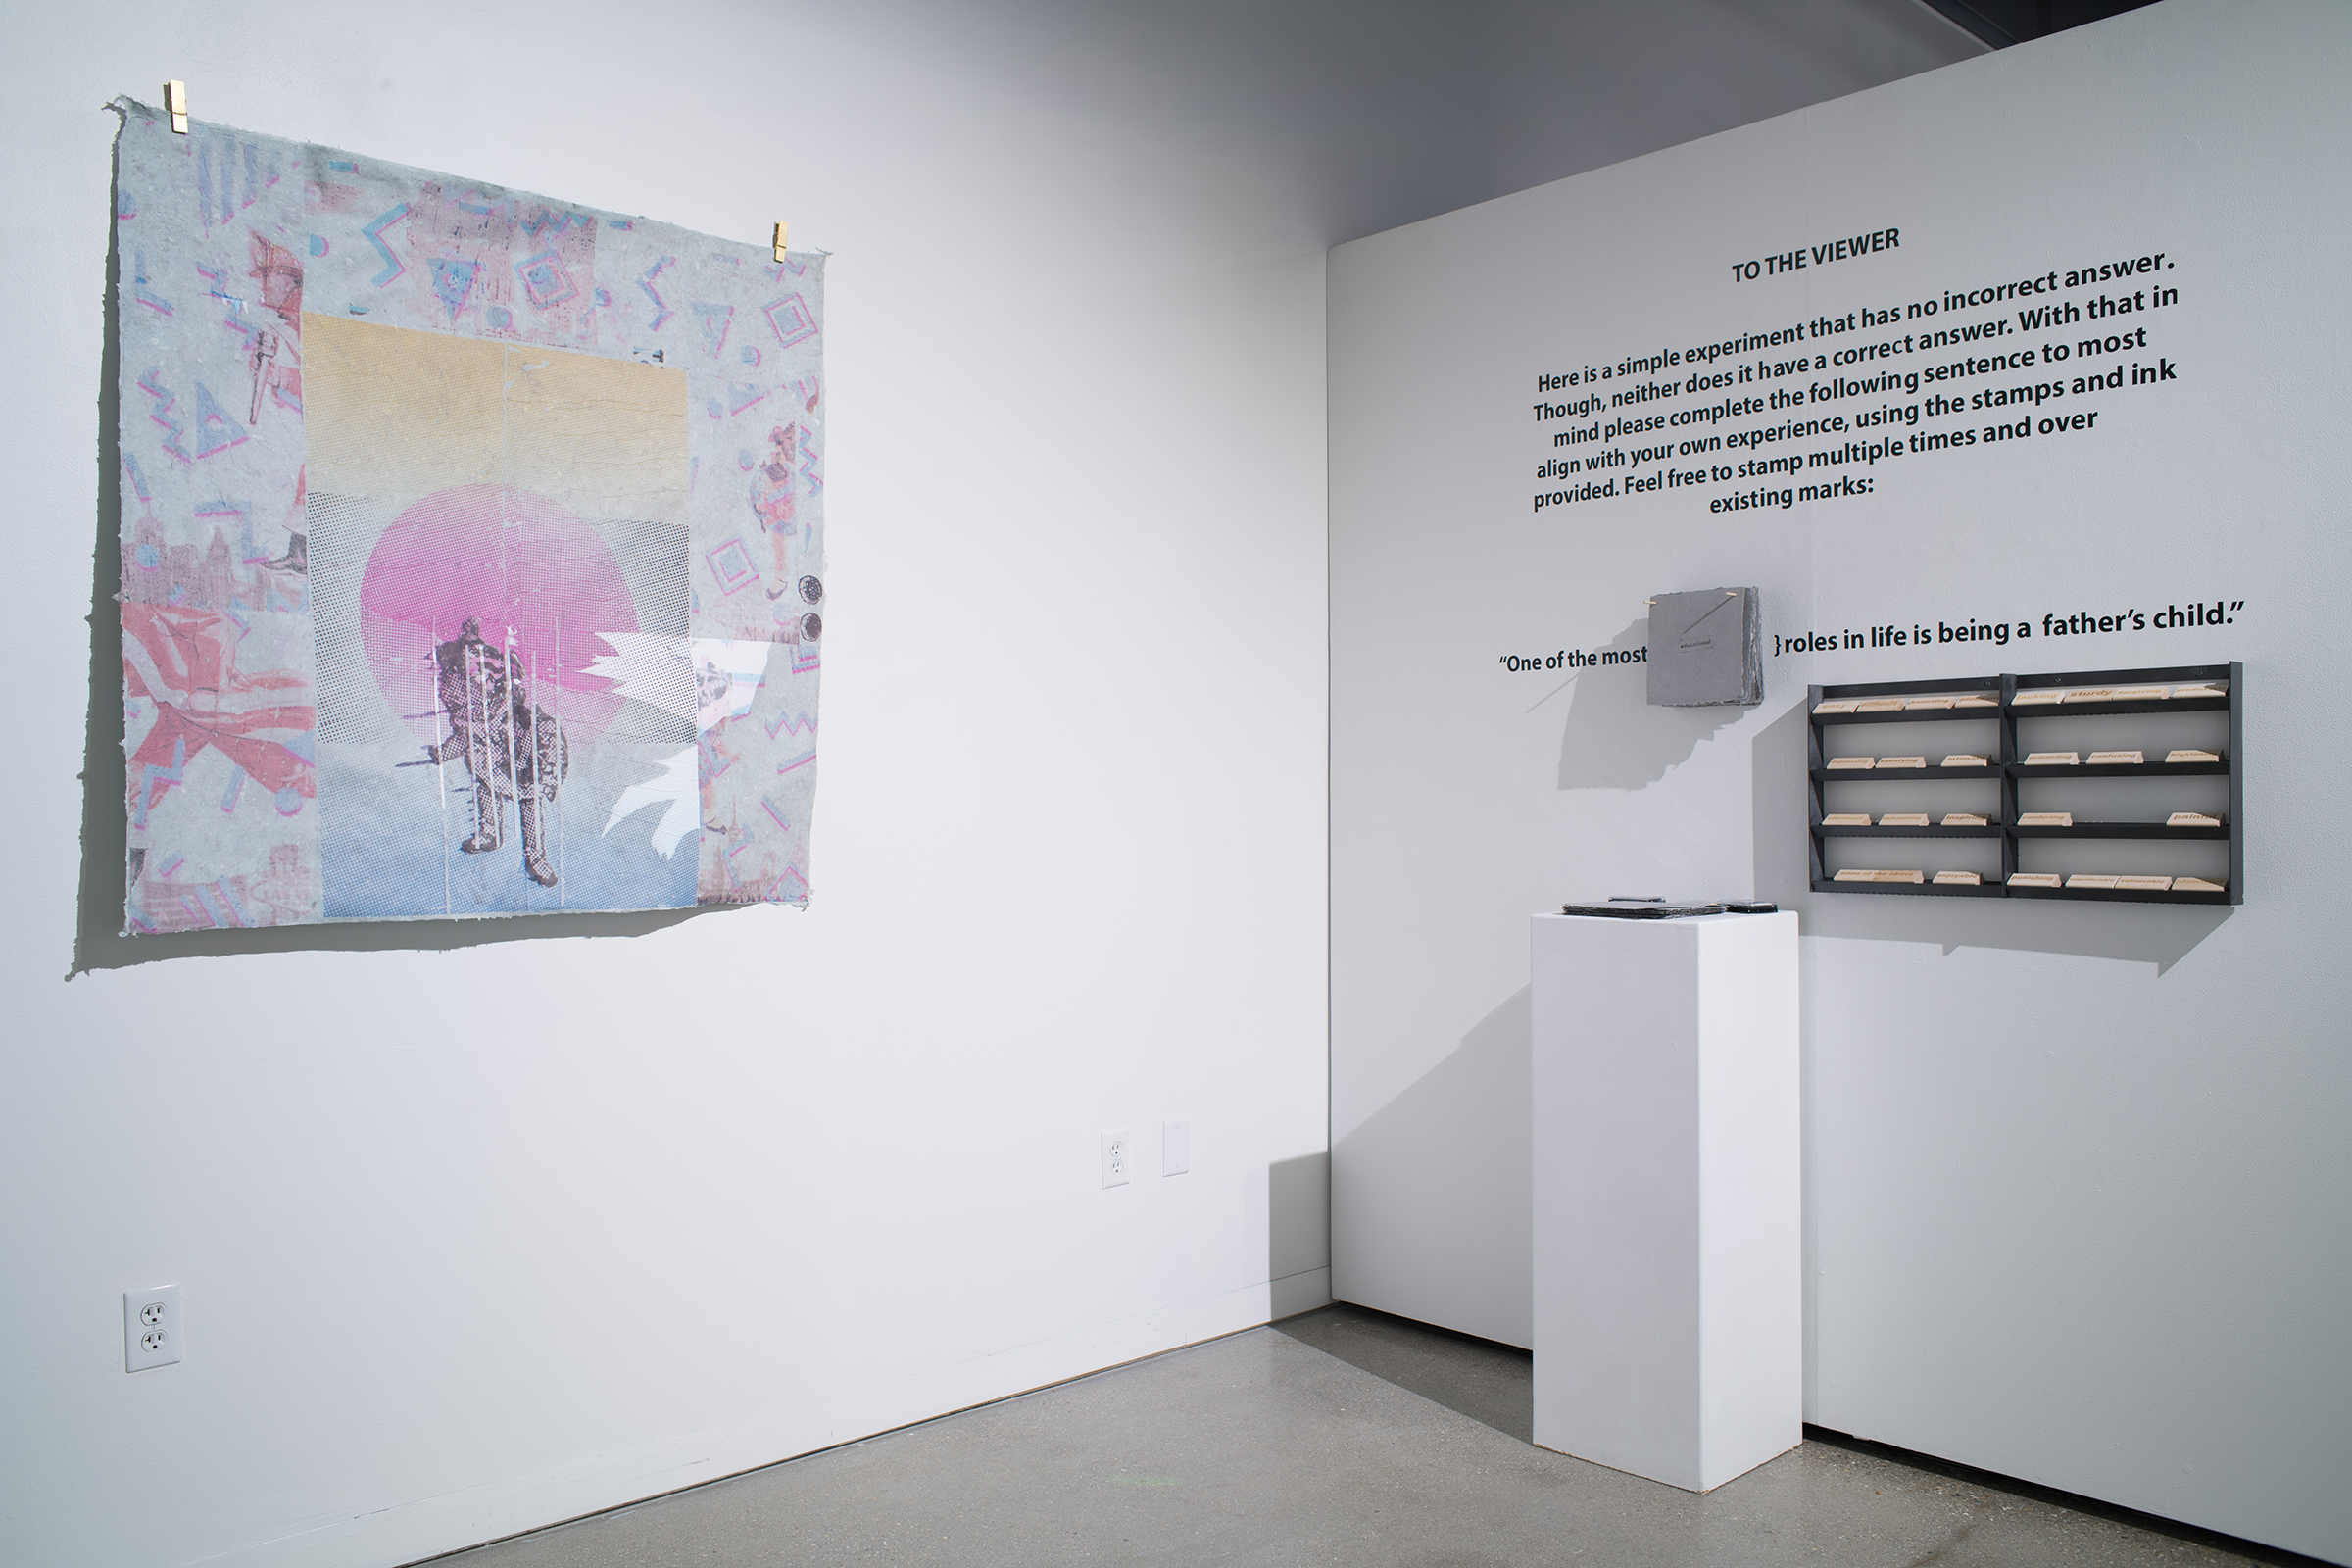 Installation view of Familiar Words Between Good and Bad Master of Fine Arts Exhibition by Kayla Story. Photography by Kyle Herrera.